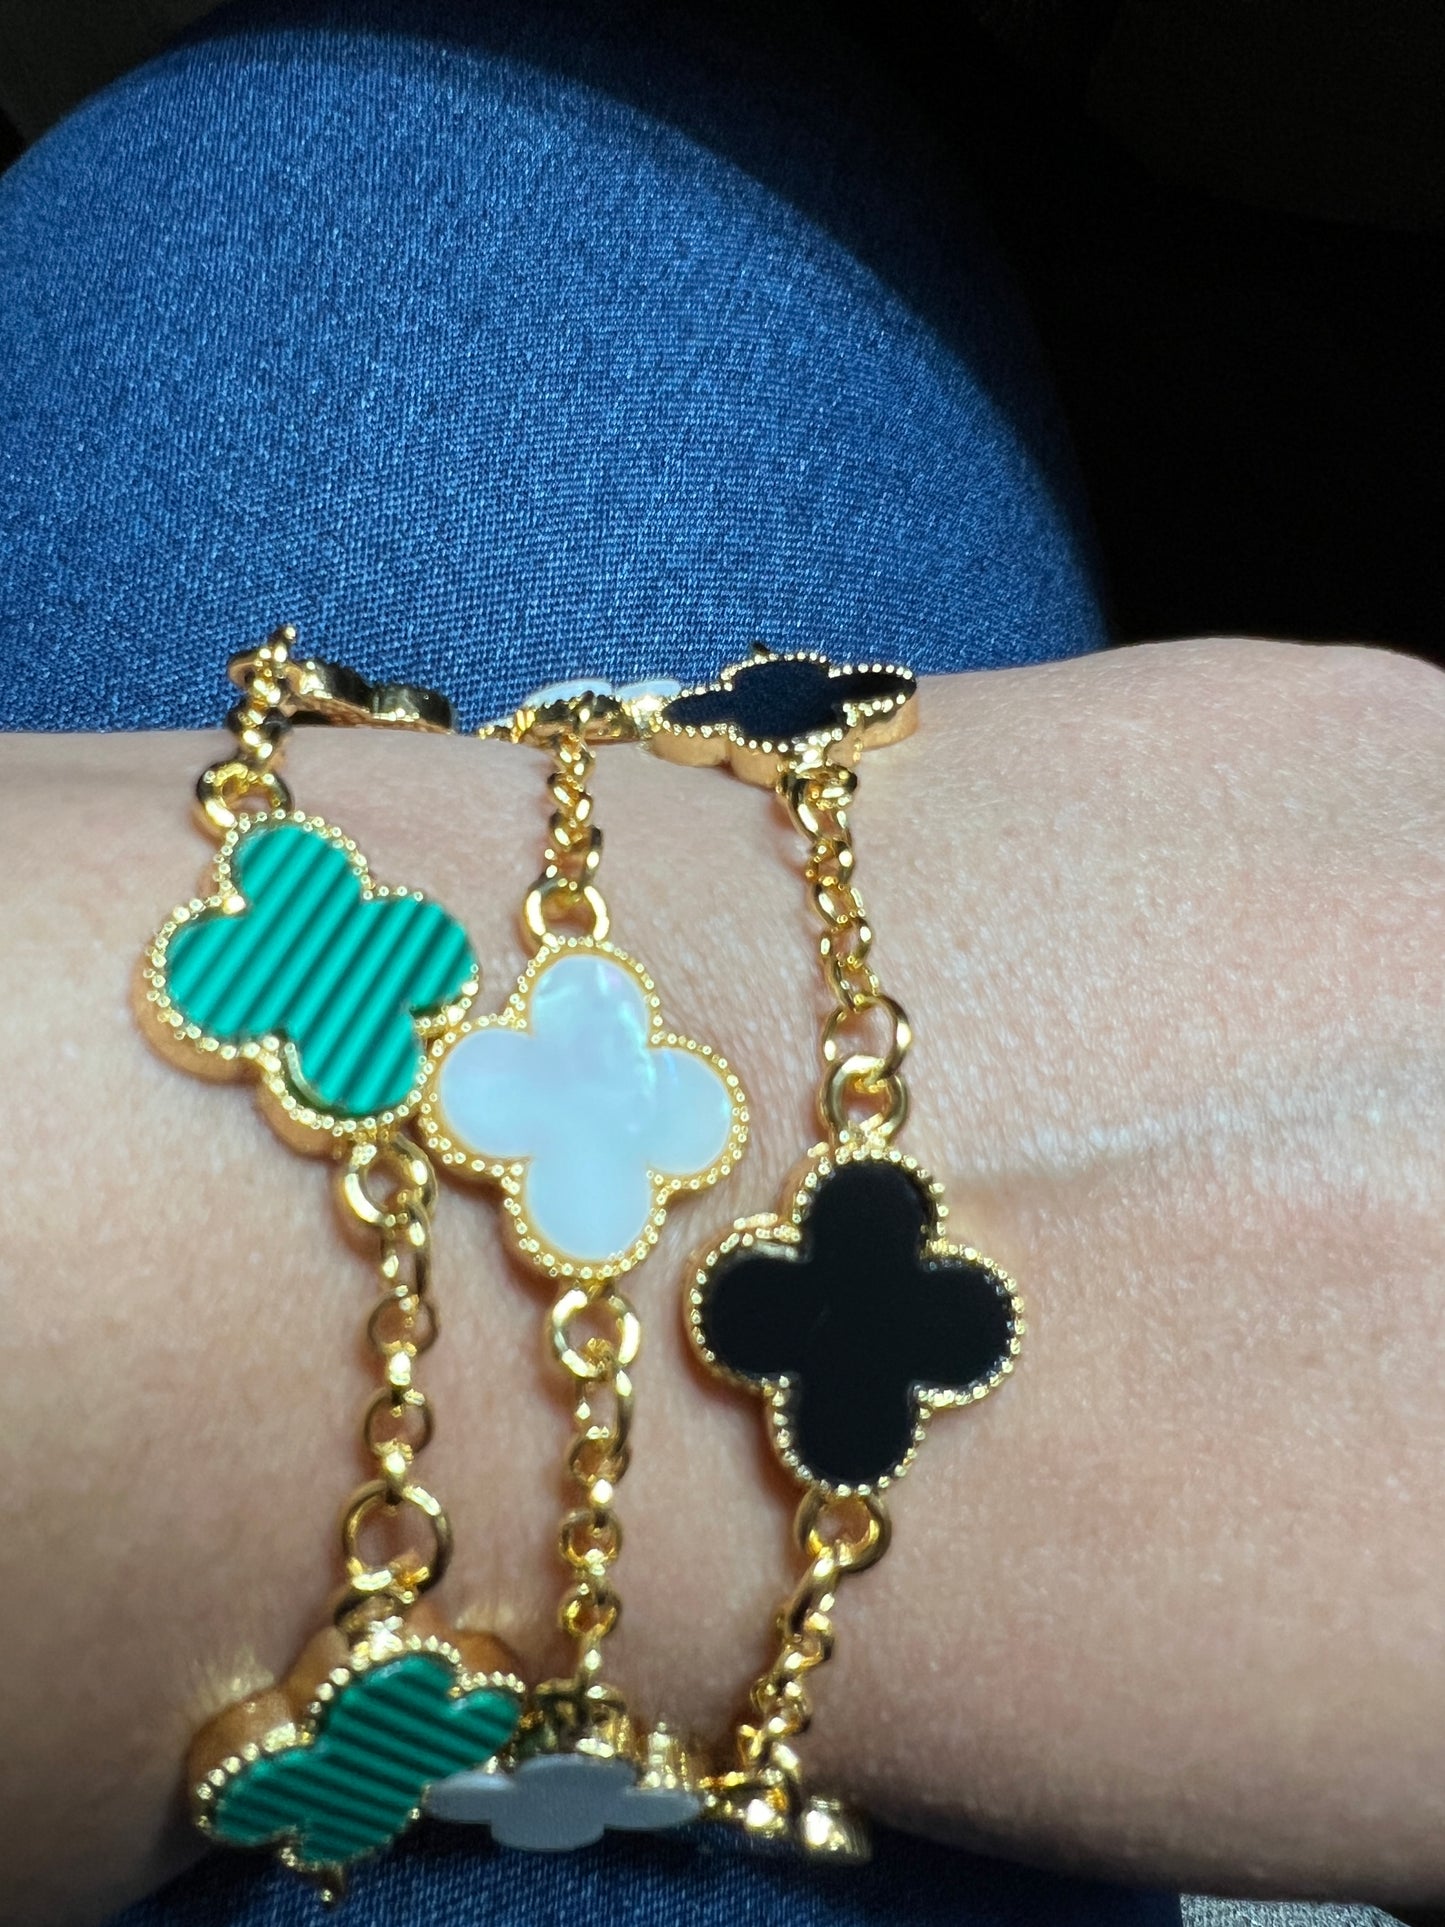 Gilded Luck: 22k Gold-Plated Clover Chain Bracelets – Timeless Charm for Every Wrist